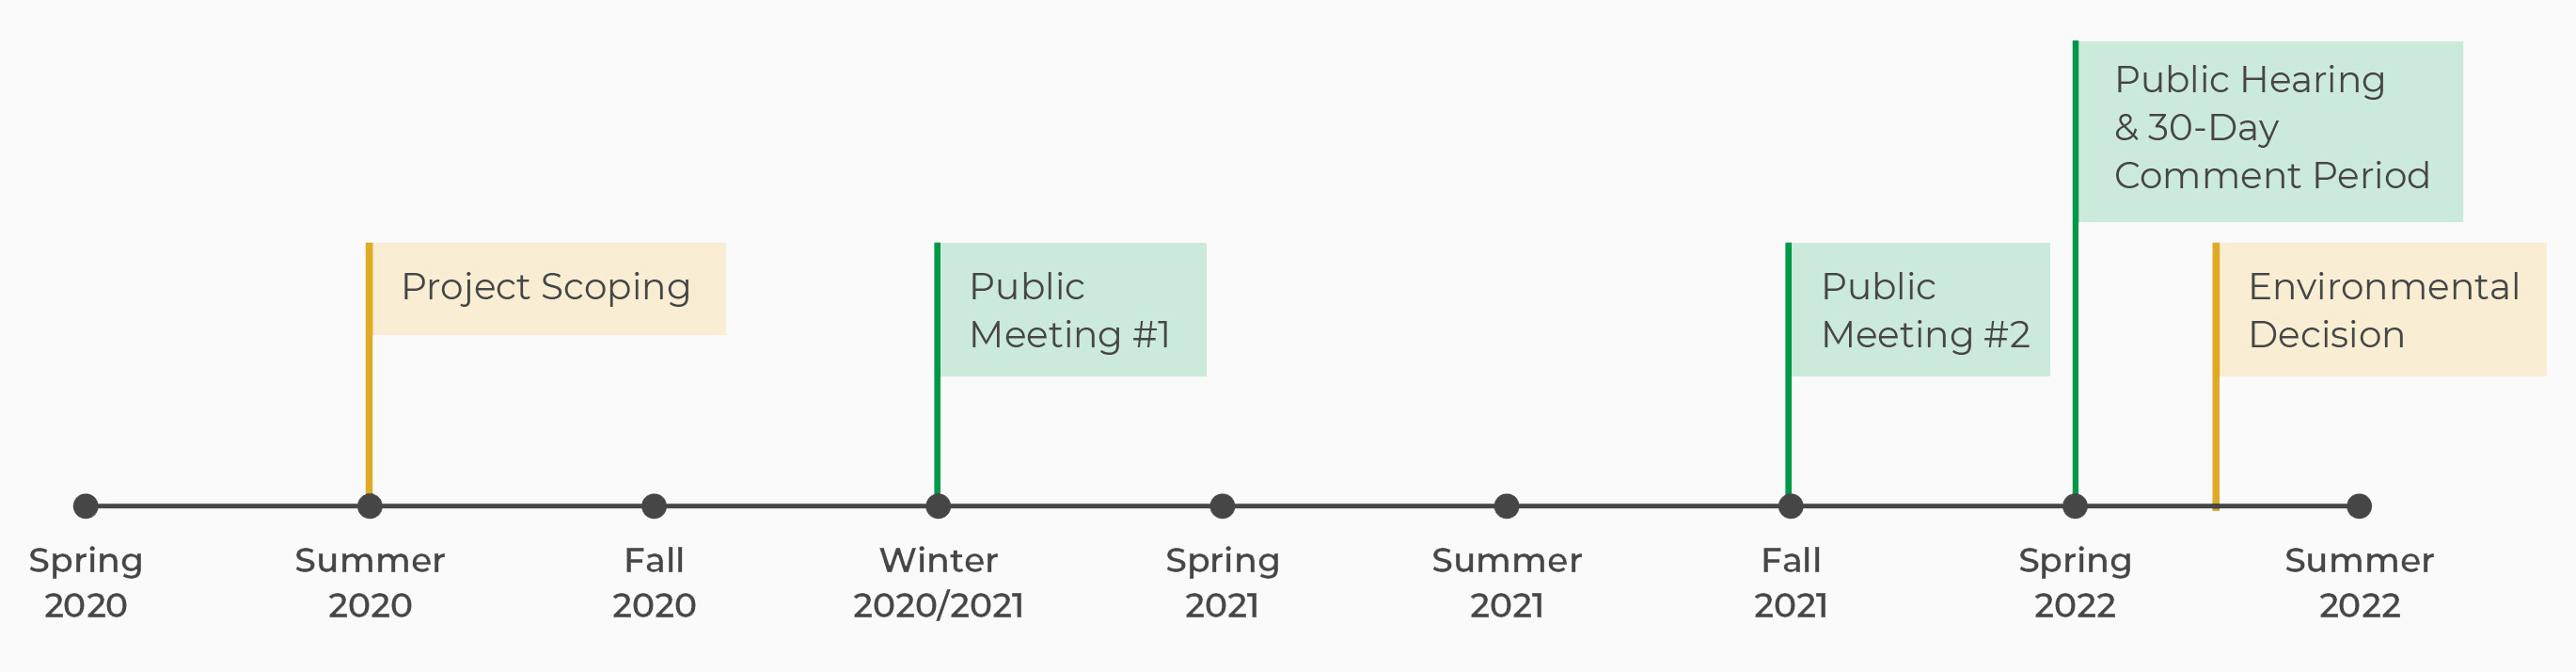 Timeline showing project scoping in summer 2020, public meeting No. 1 in Winter 2020/2021, public meeting No. 2 in fall 2021, public hearing and 30-day comment period in spring 2022, and environmental decision in spring 2022.